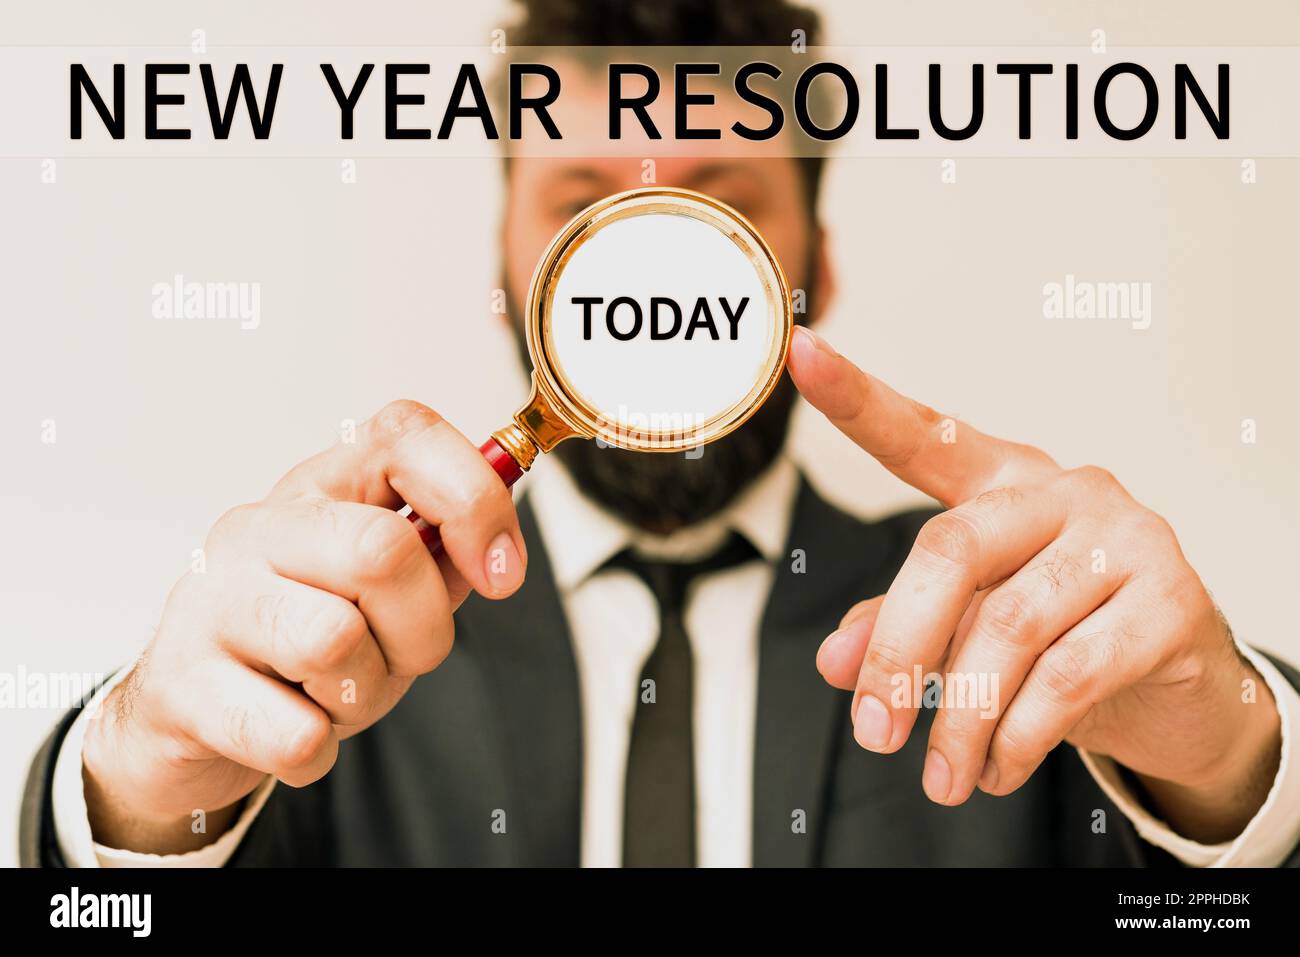 Text showing inspiration New Year Resolution. Business idea listing of goals and change with determination Stock Photo